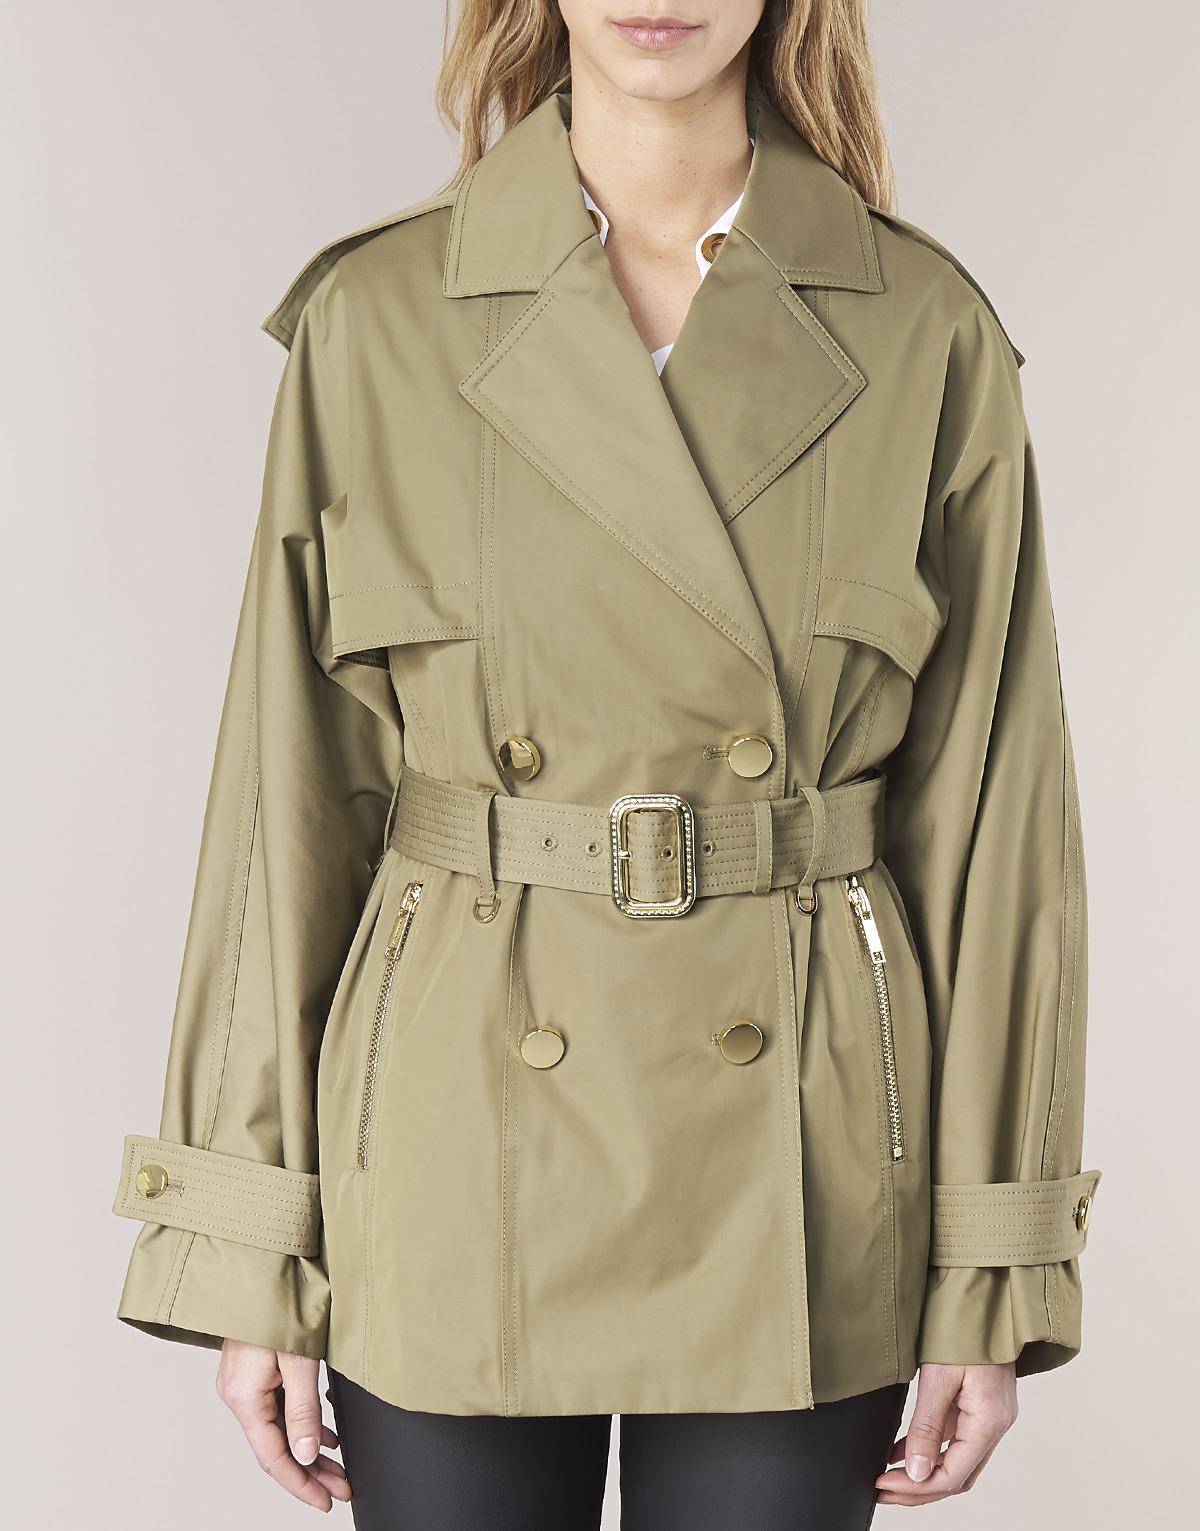 MICHAEL Michael Kors Shrt Wide Trench Trench Coat in Green - Lyst